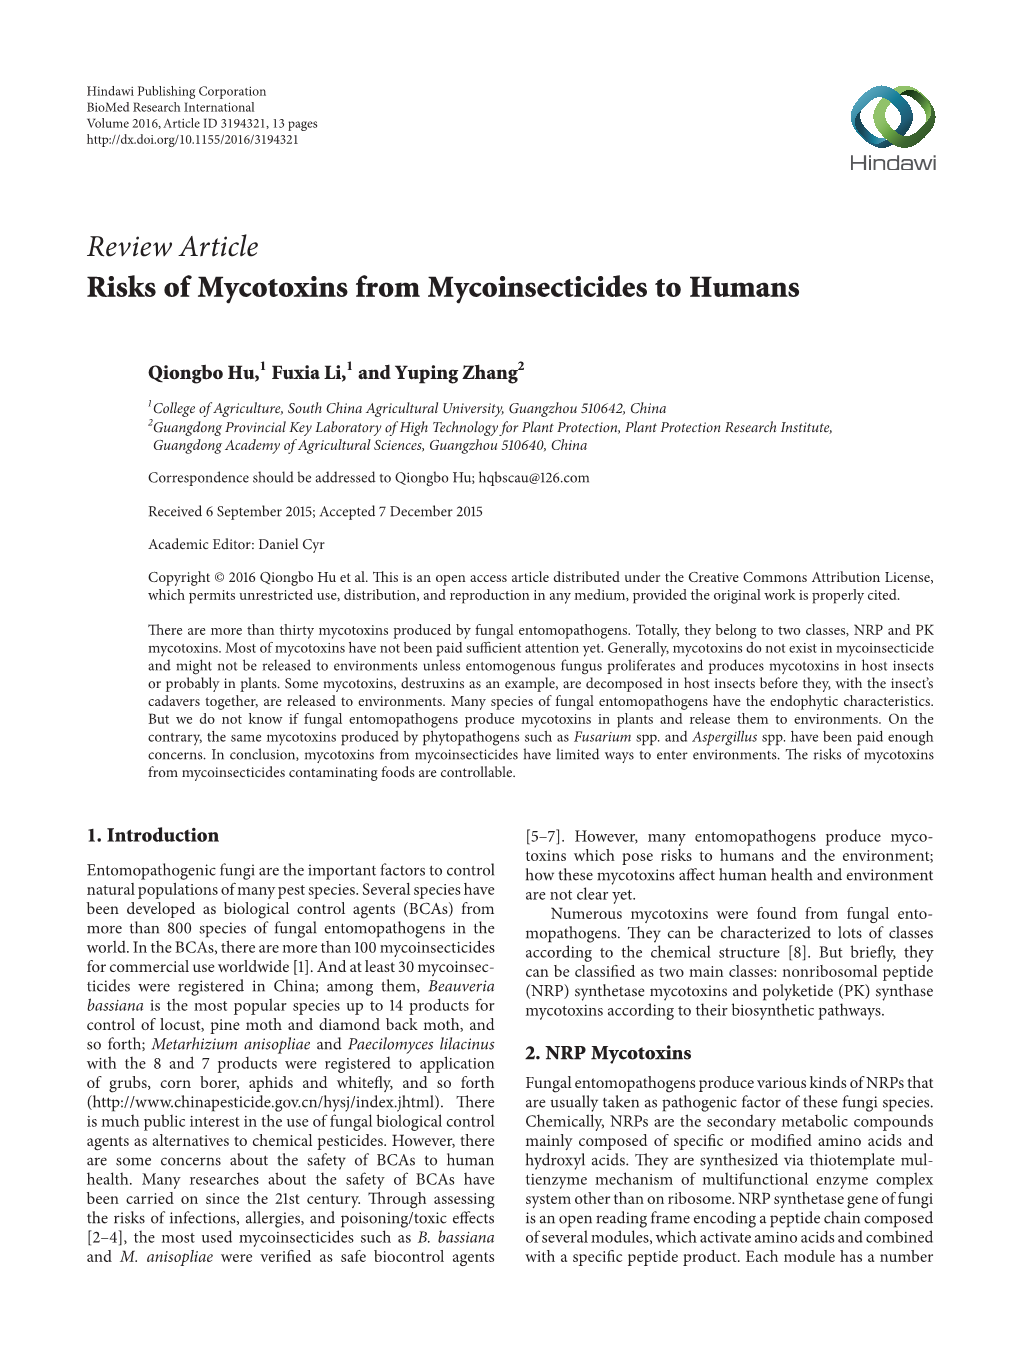 Review Article Risks of Mycotoxins from Mycoinsecticides to Humans